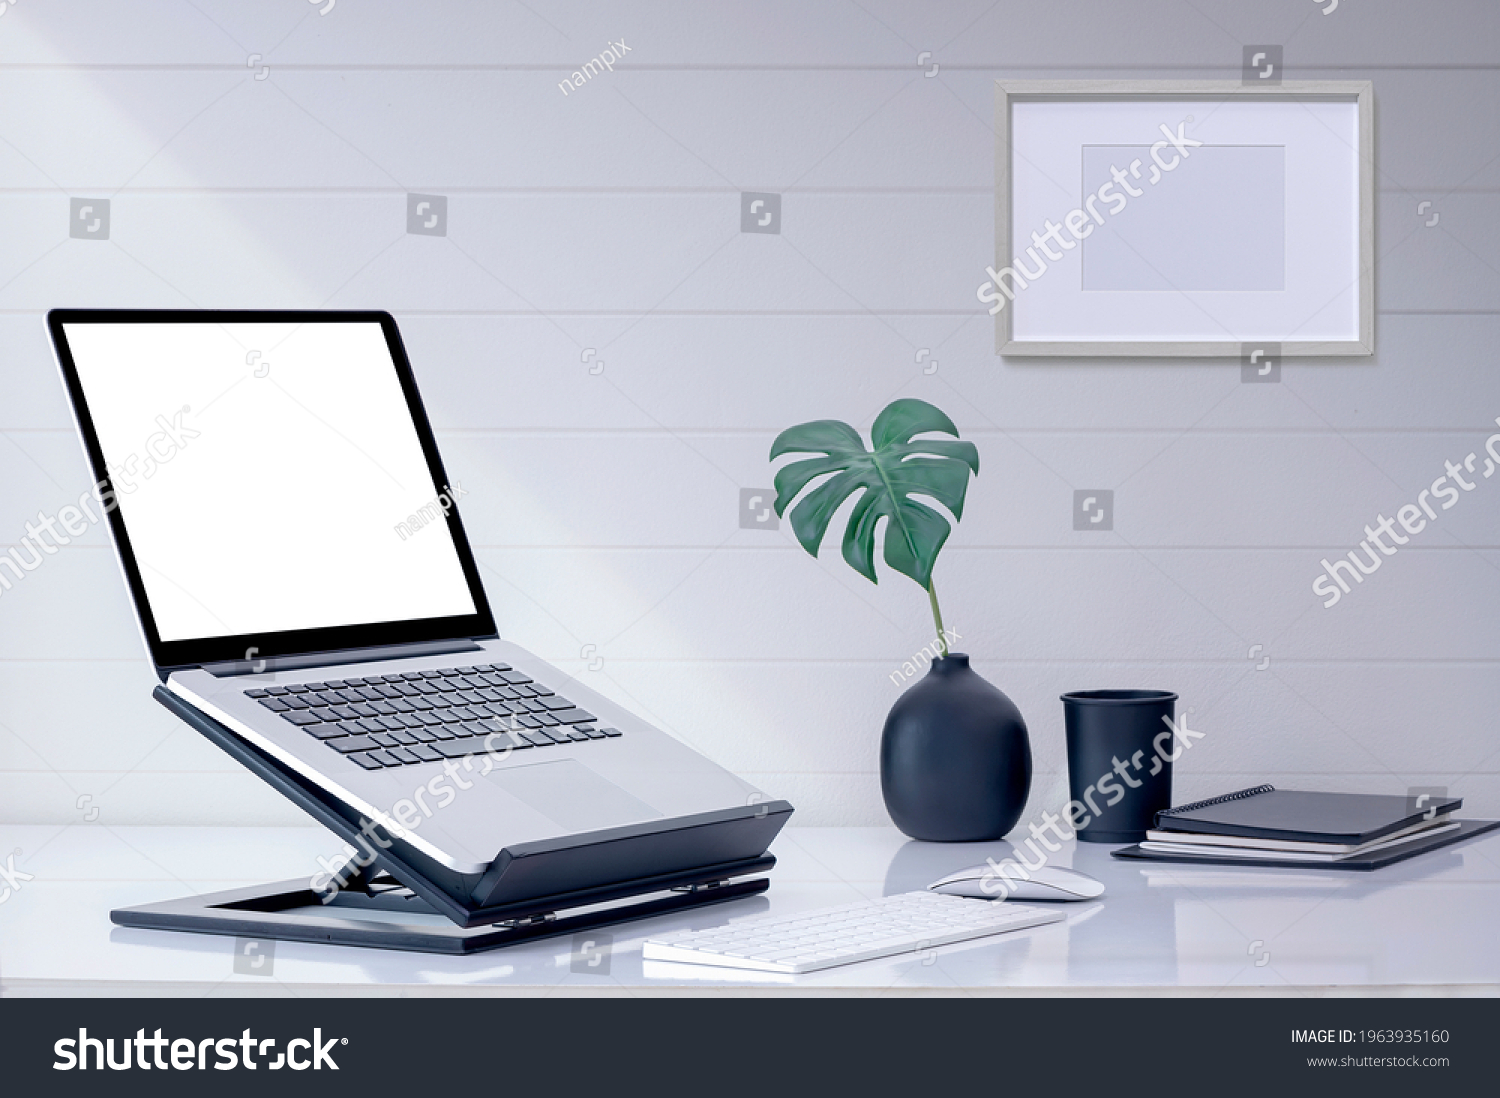 Mockup blank screen laptop computer on wooden stand with keyboard and mouse on white top table. #1963935160